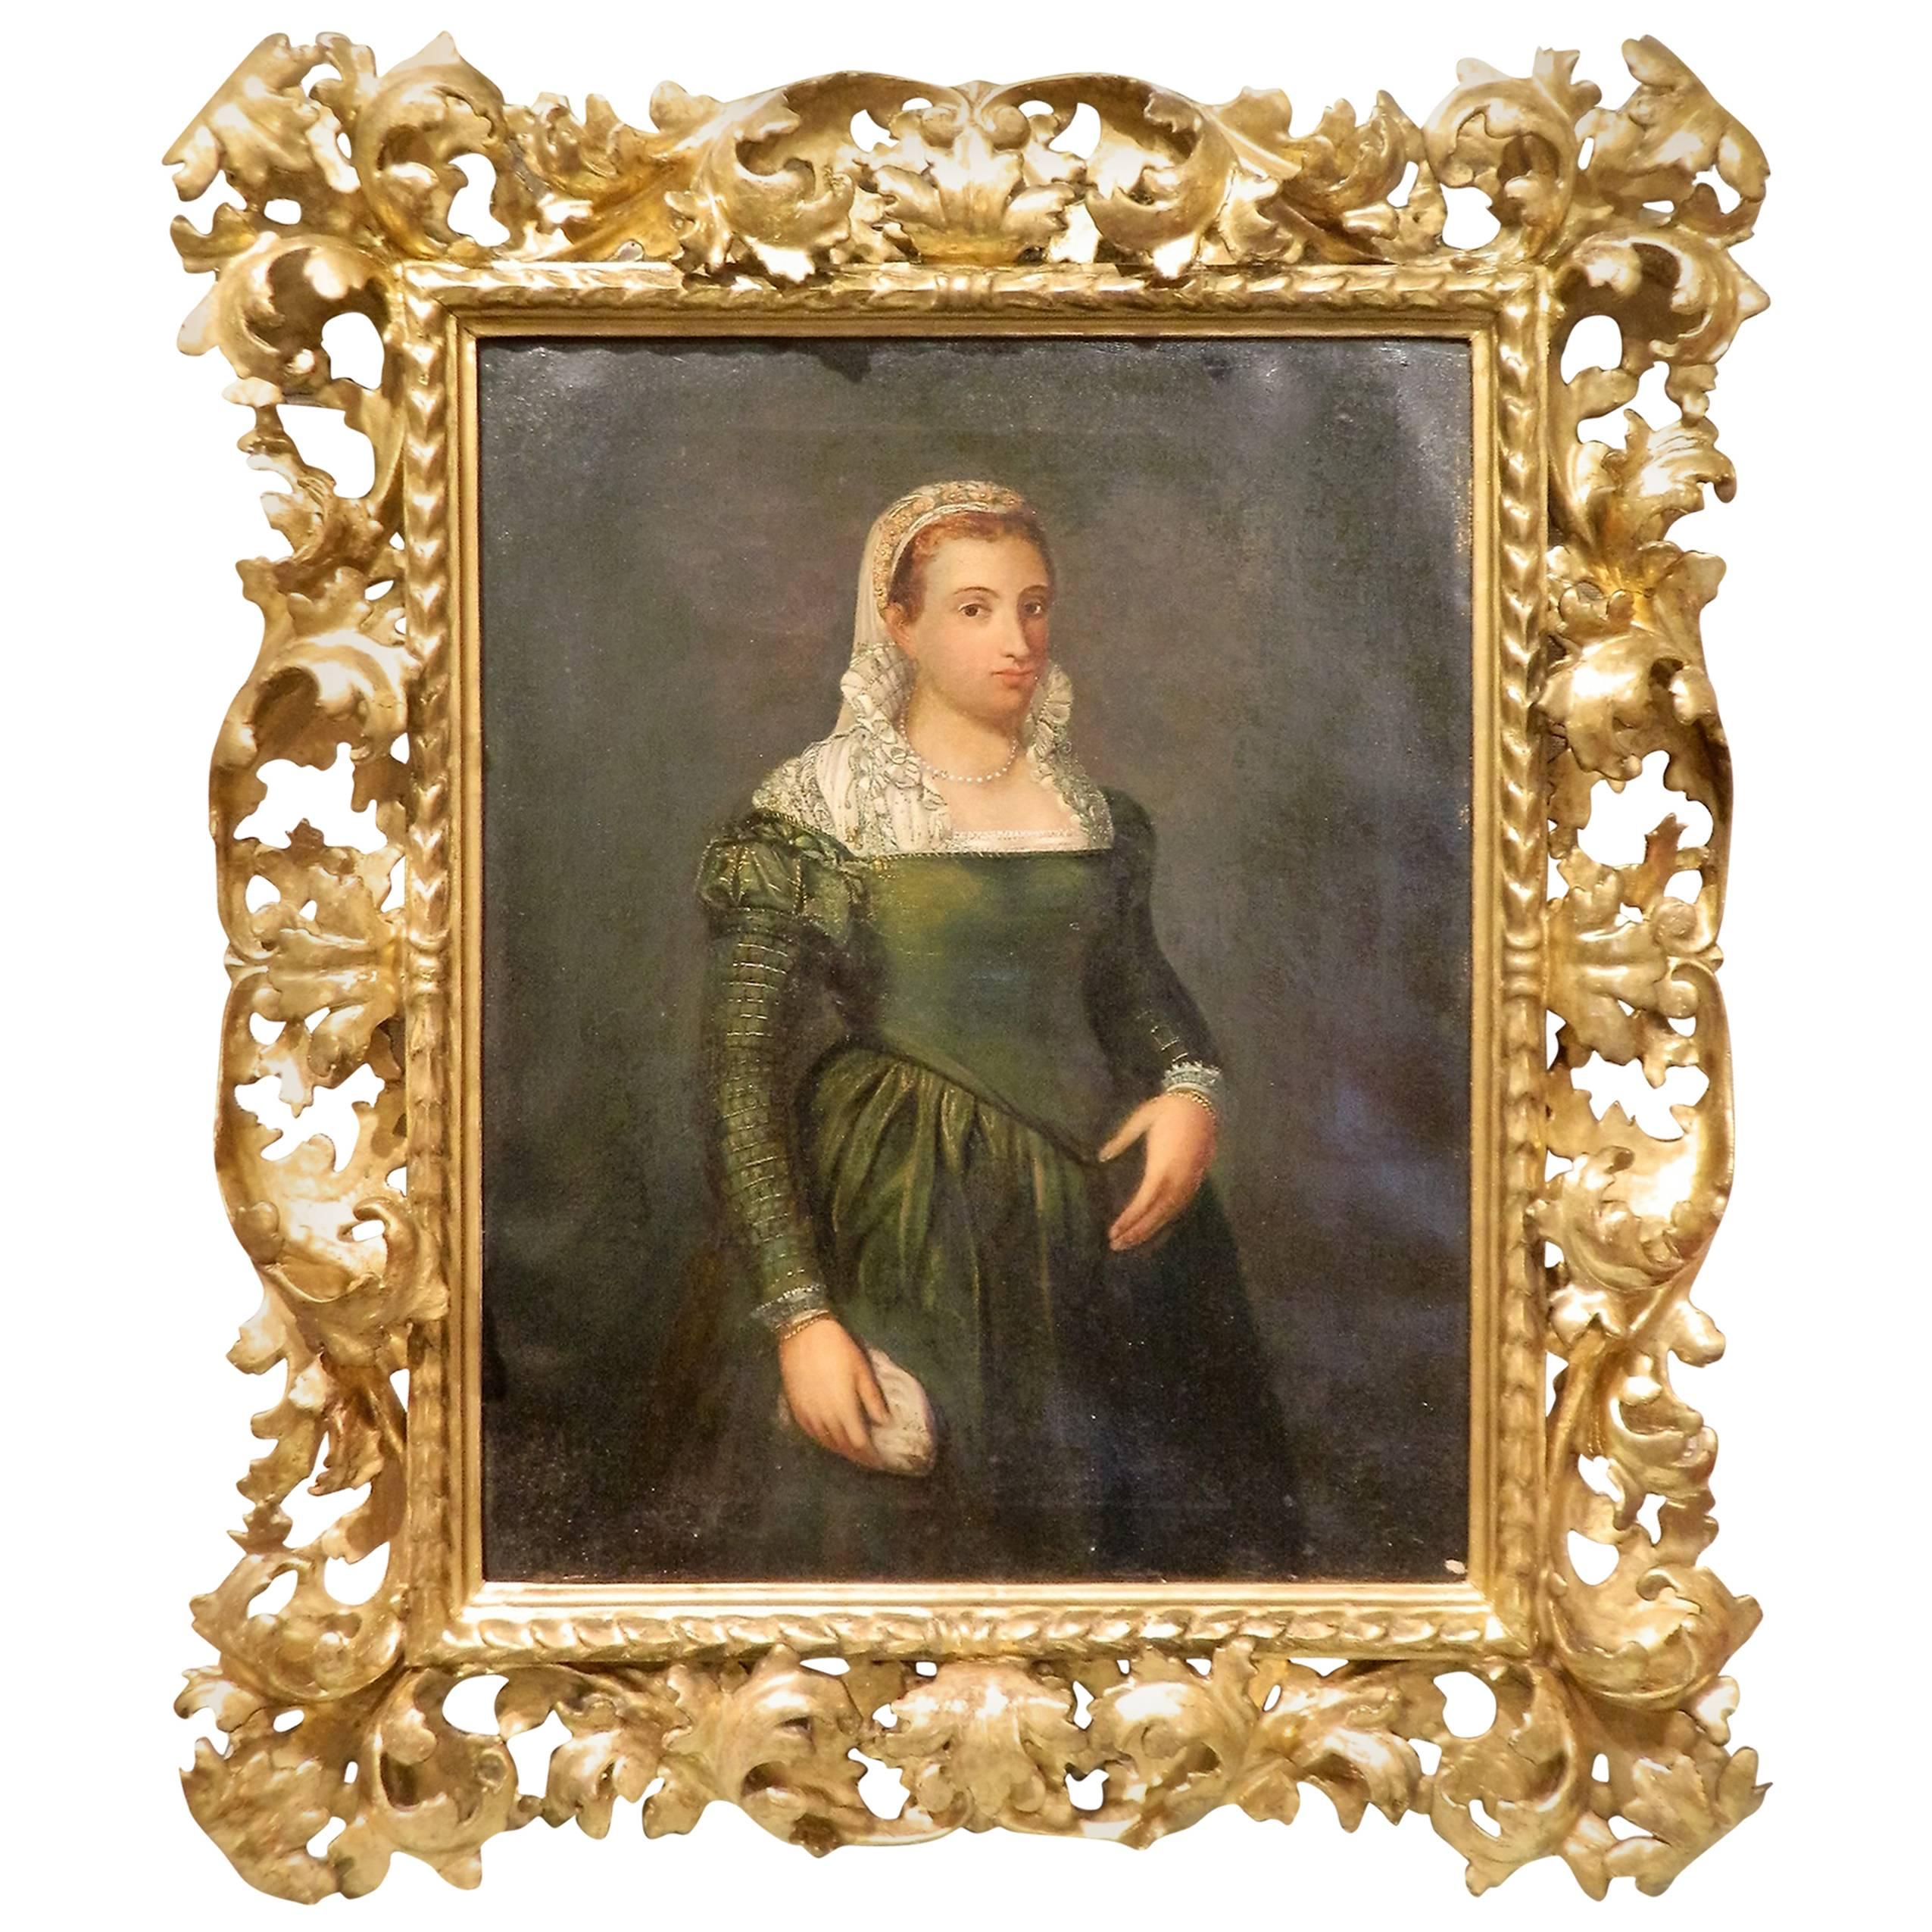 Oil on Canvas English Portrait of a Lady in a Gold Gilt Frame, 19th Century